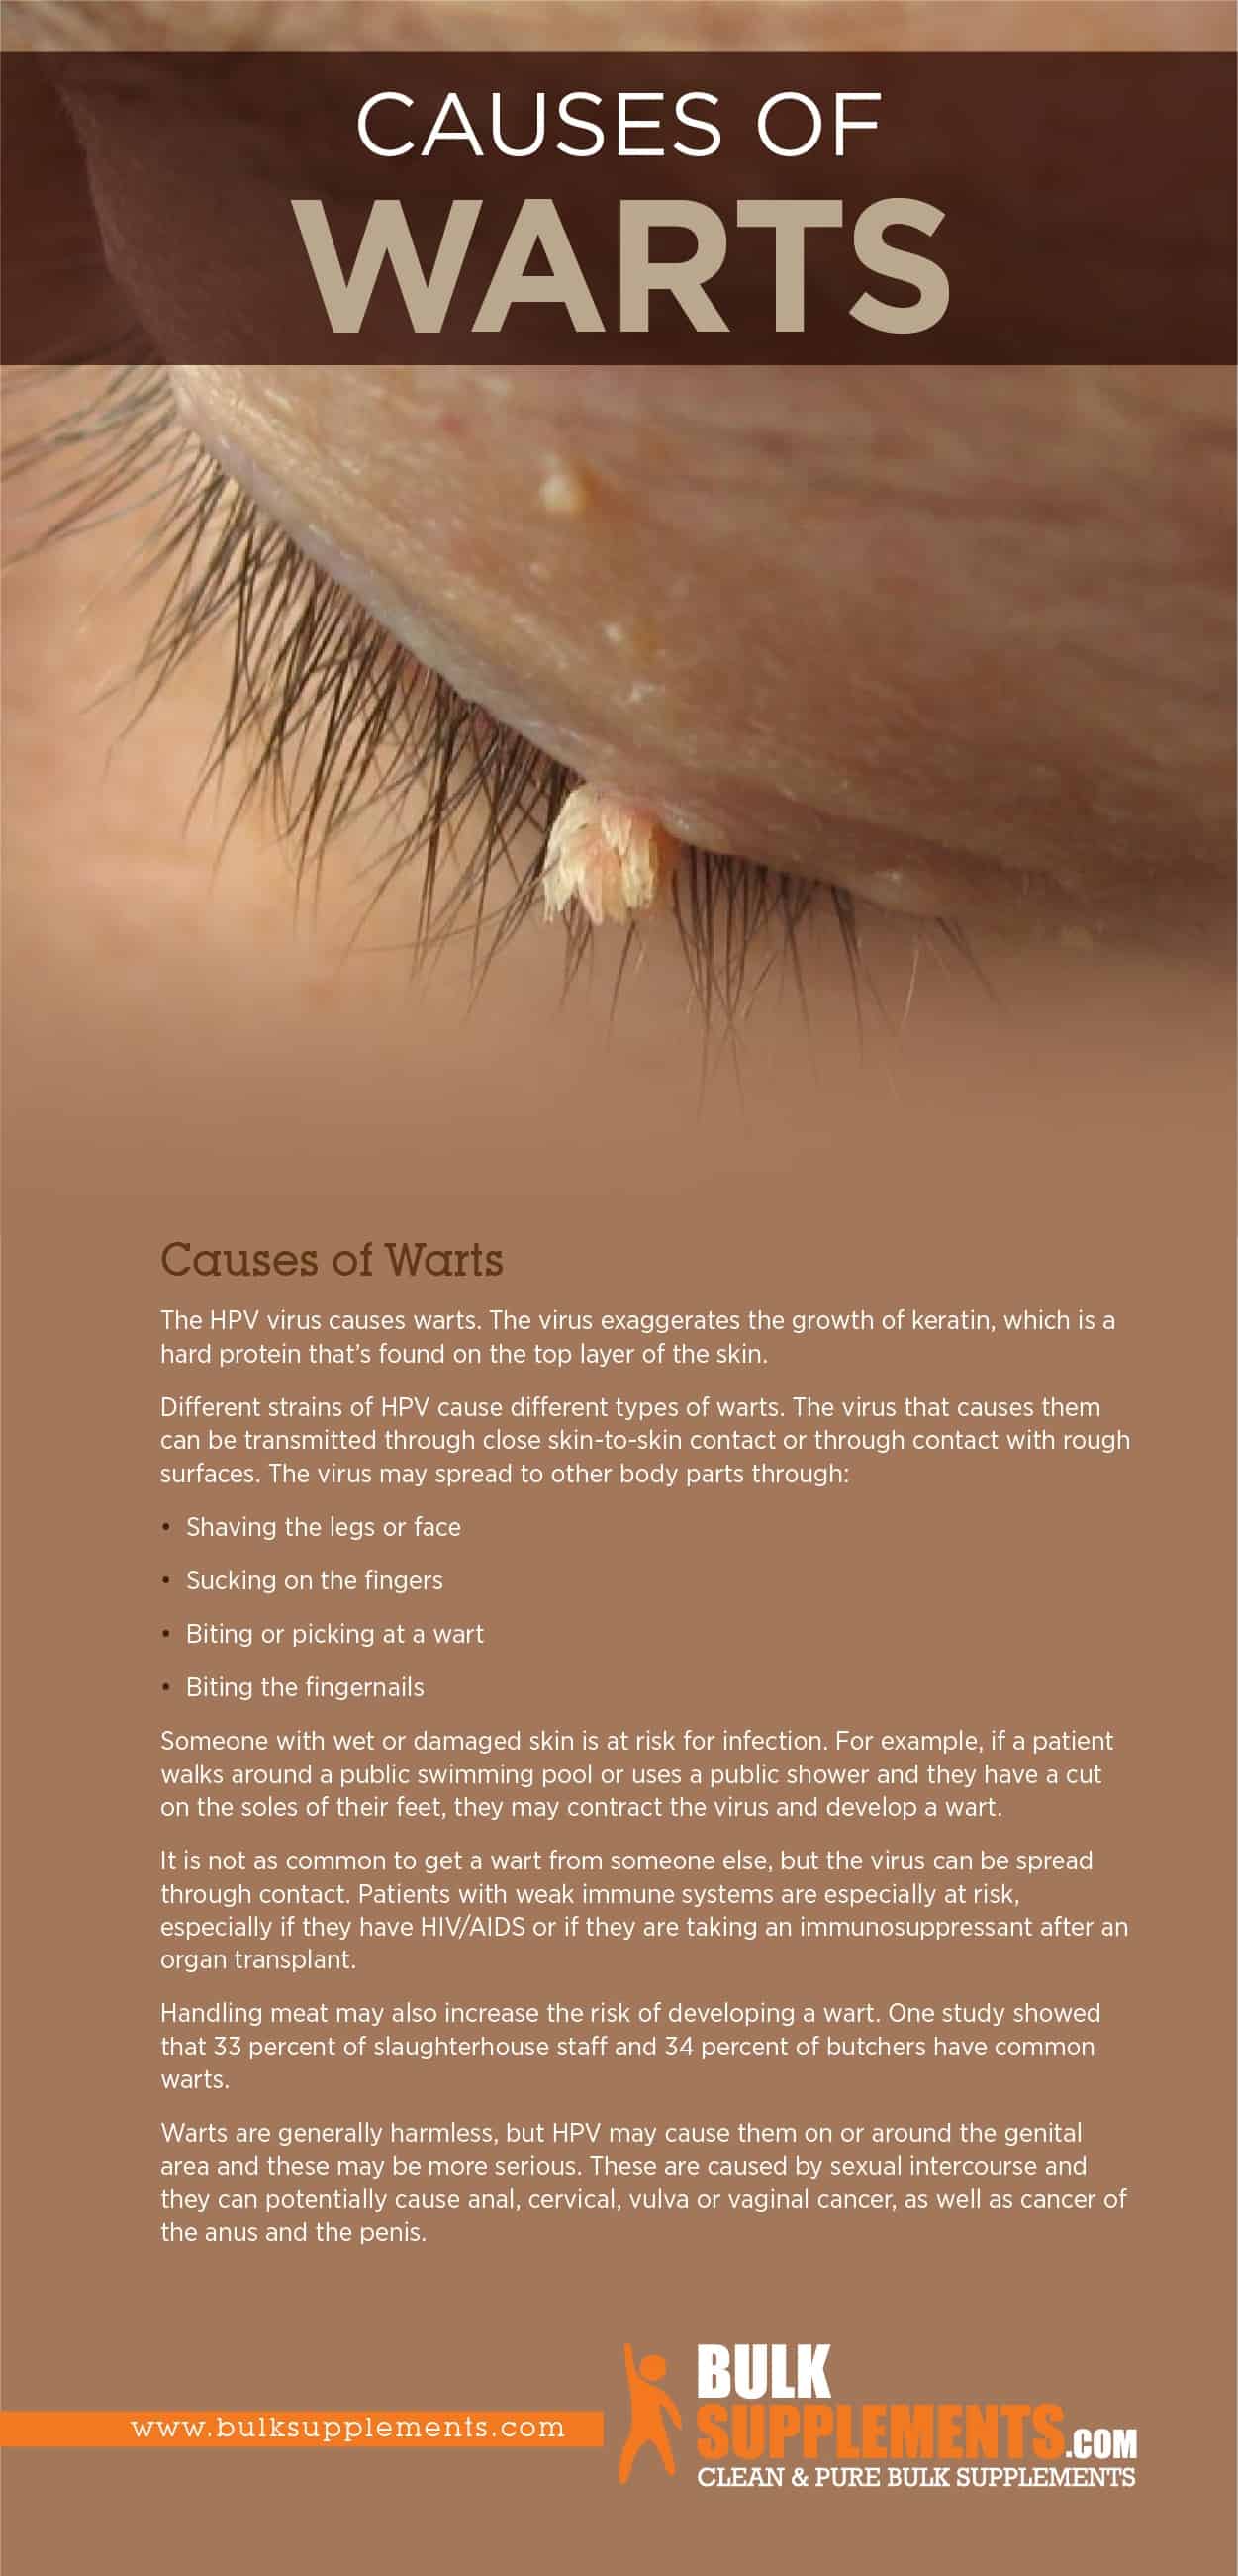 Causes of Warts